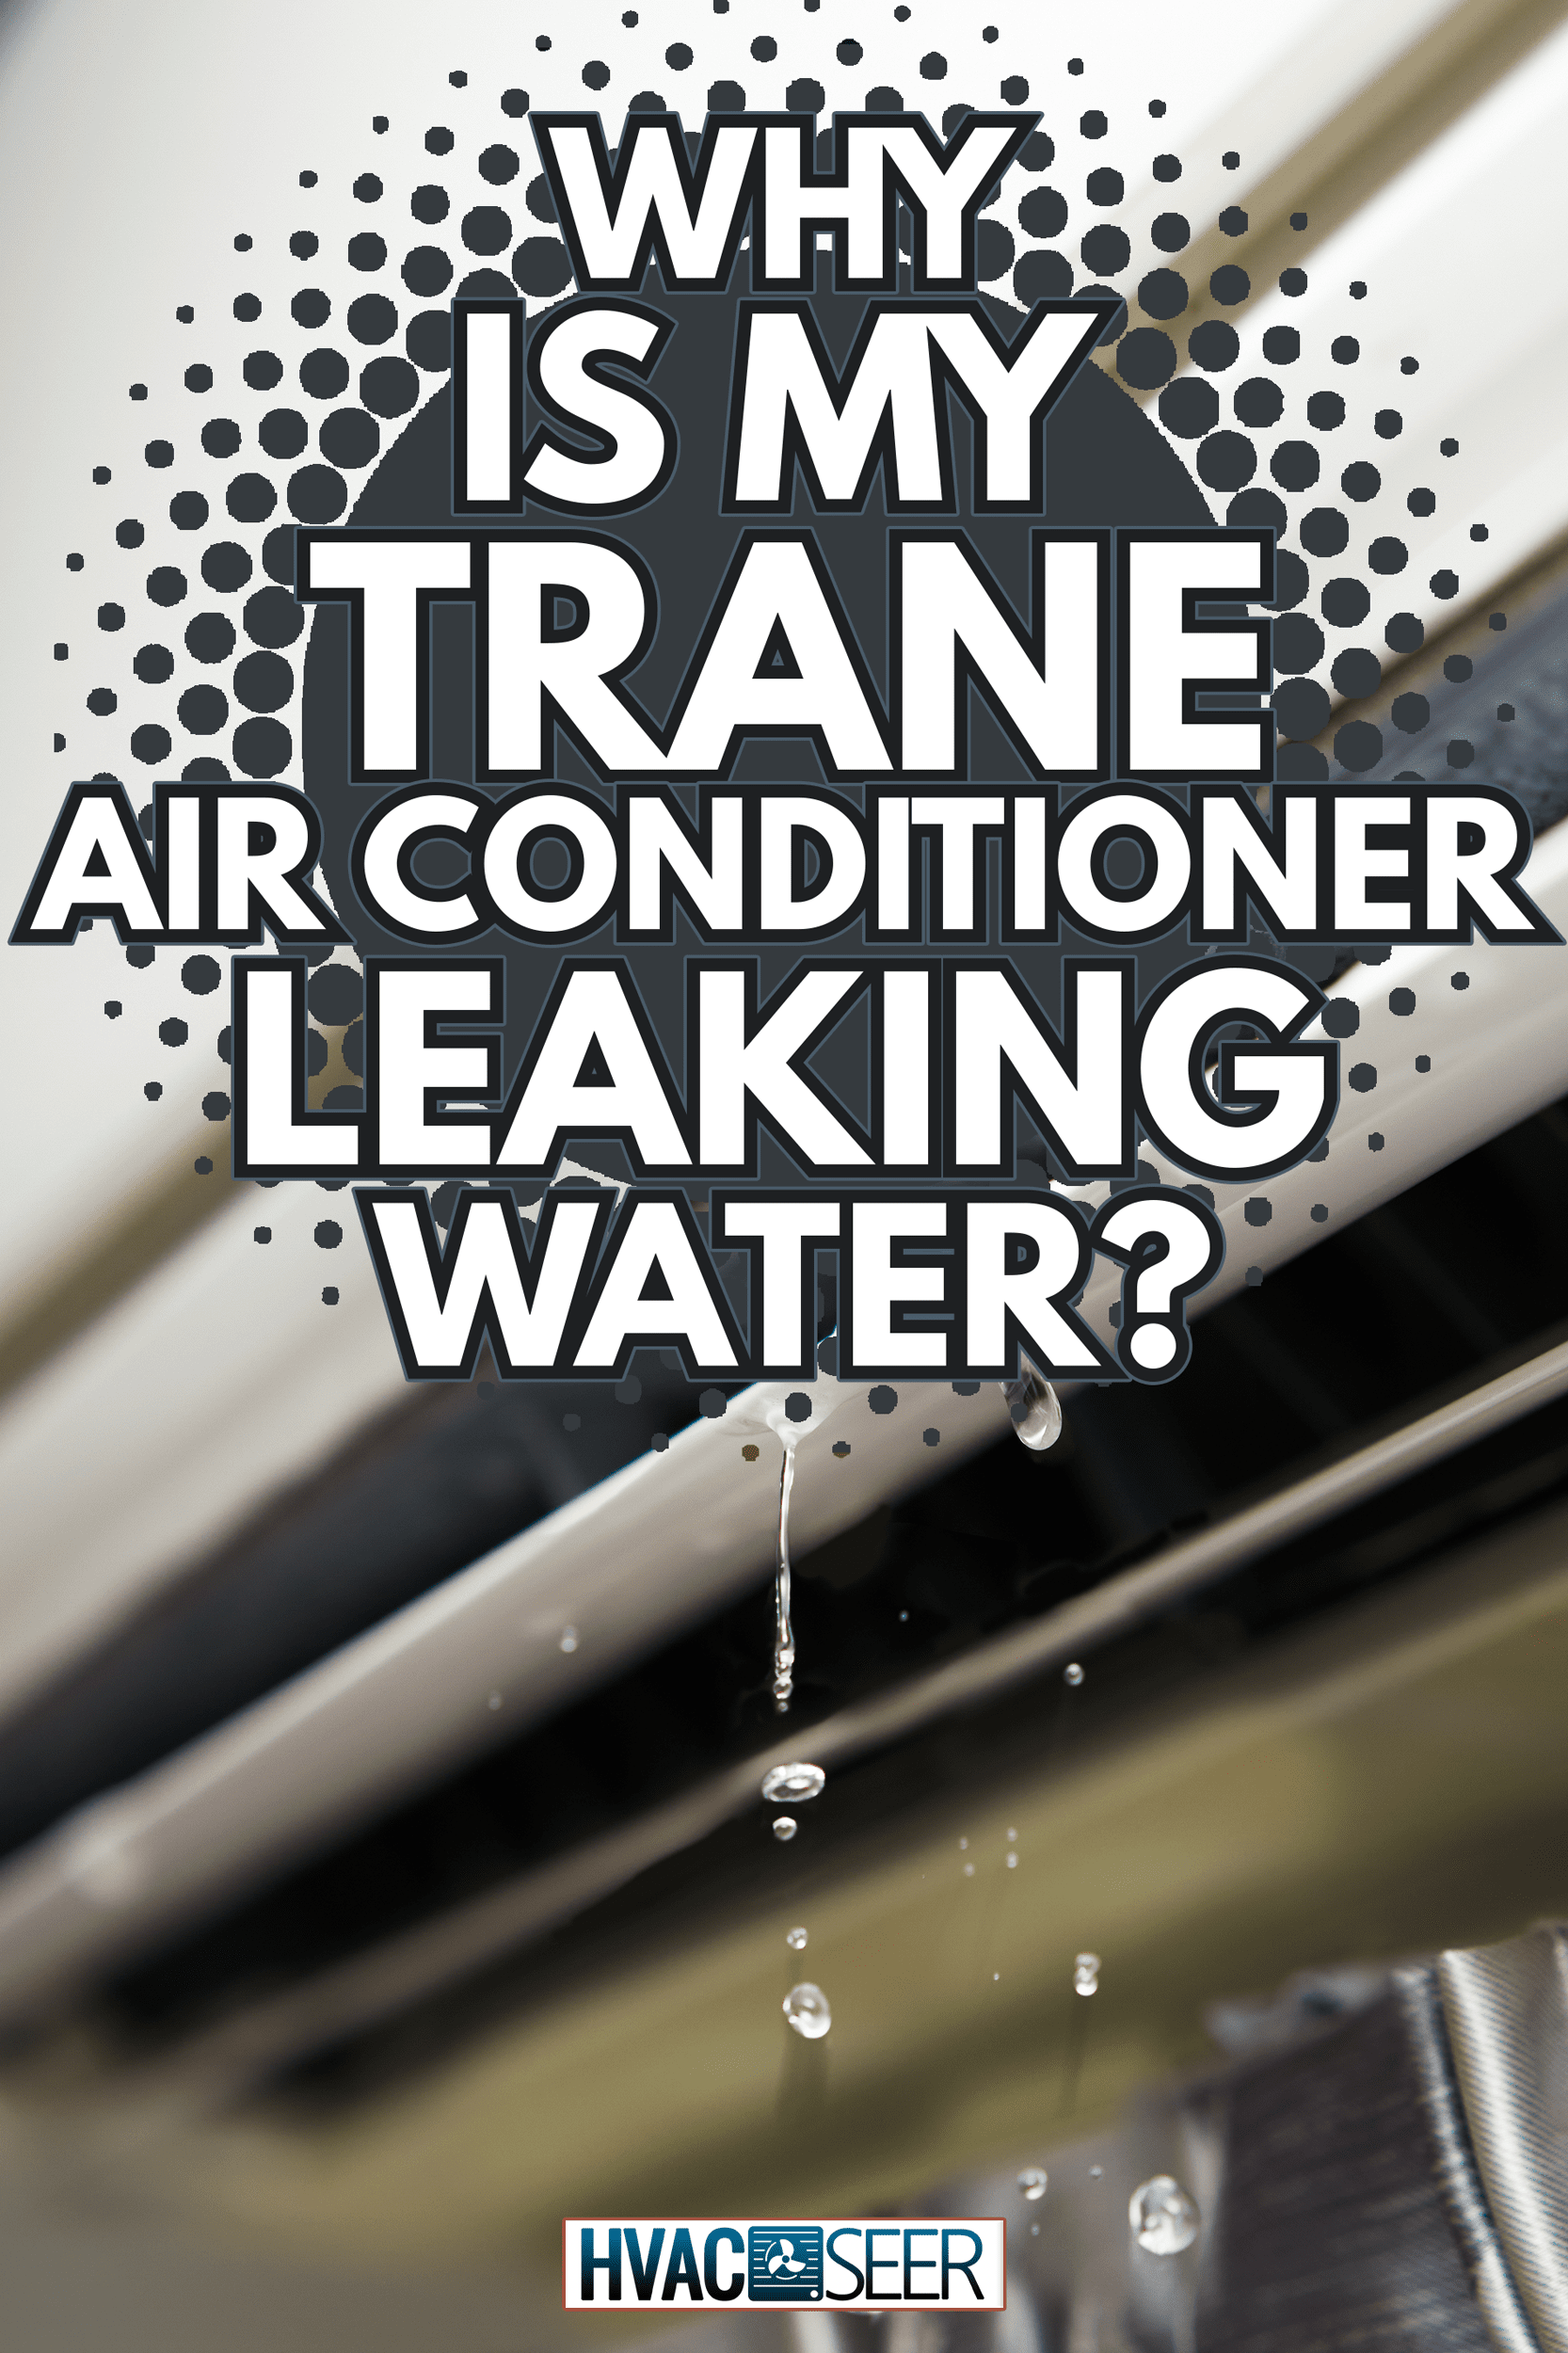 Water leaking from the air conditioner drips from the cooler - Why Is My Trane Air Conditioner Leaking Water